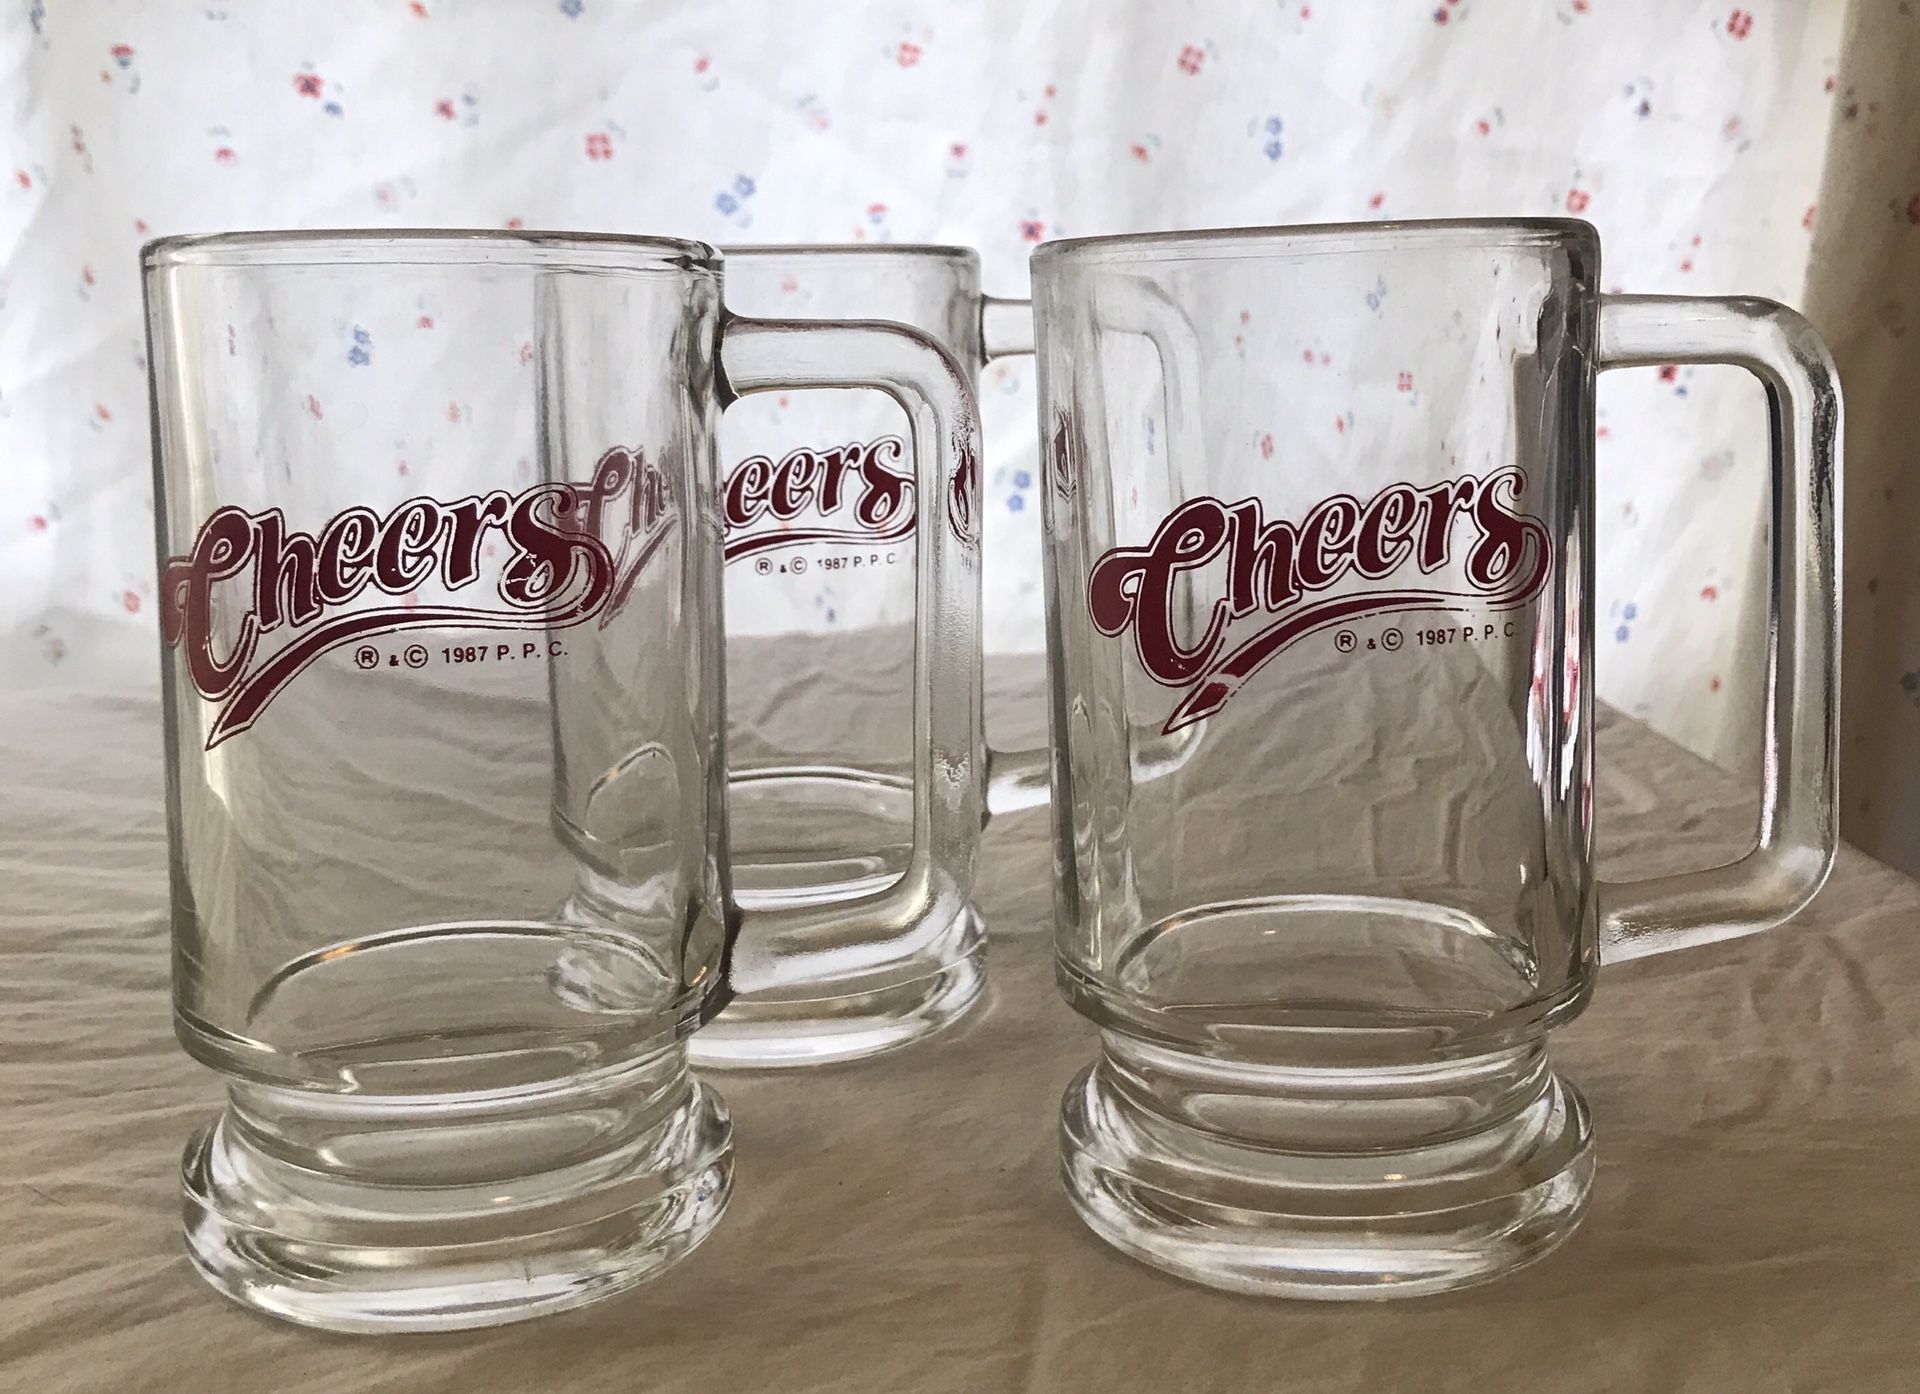 Cheers beer glasses. (Collectible item)